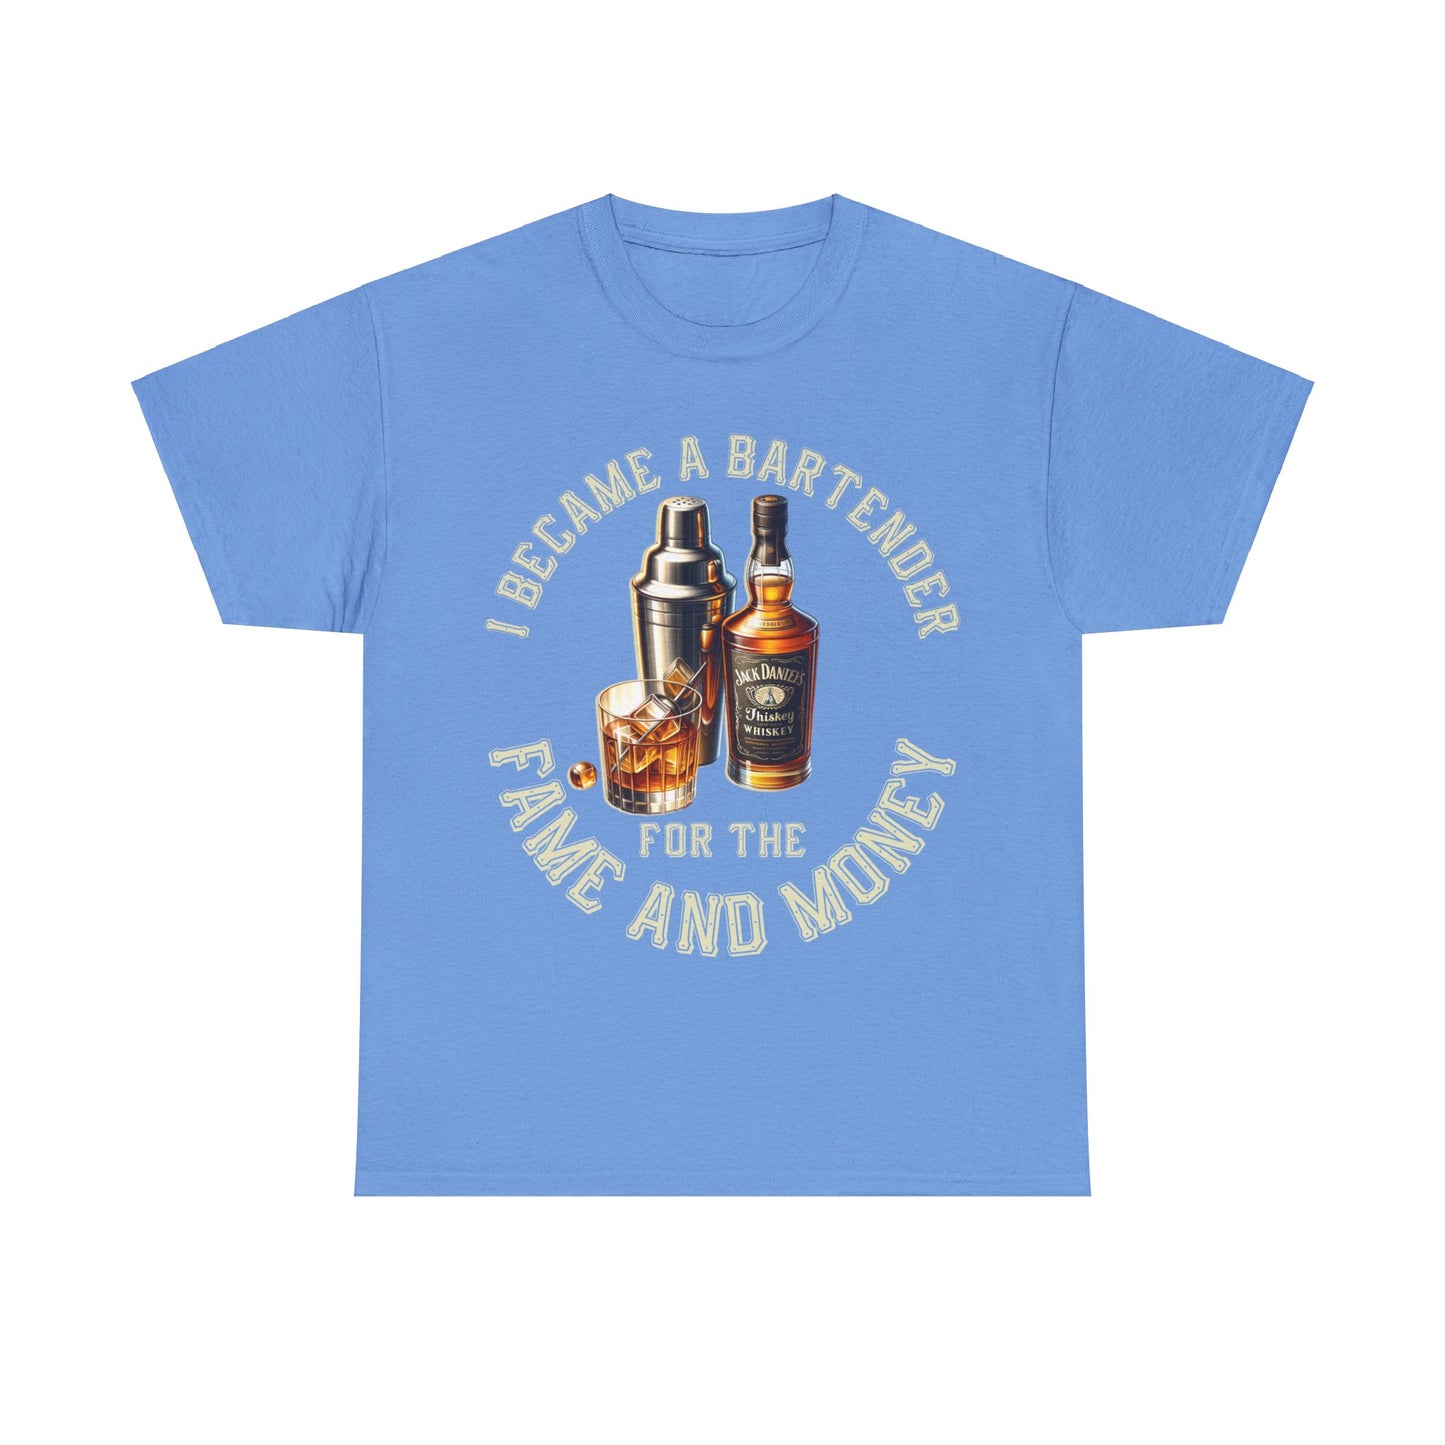 BARTENDER FAME AND MONEY ON FRONT  Unisex Heavy Cotton Tee